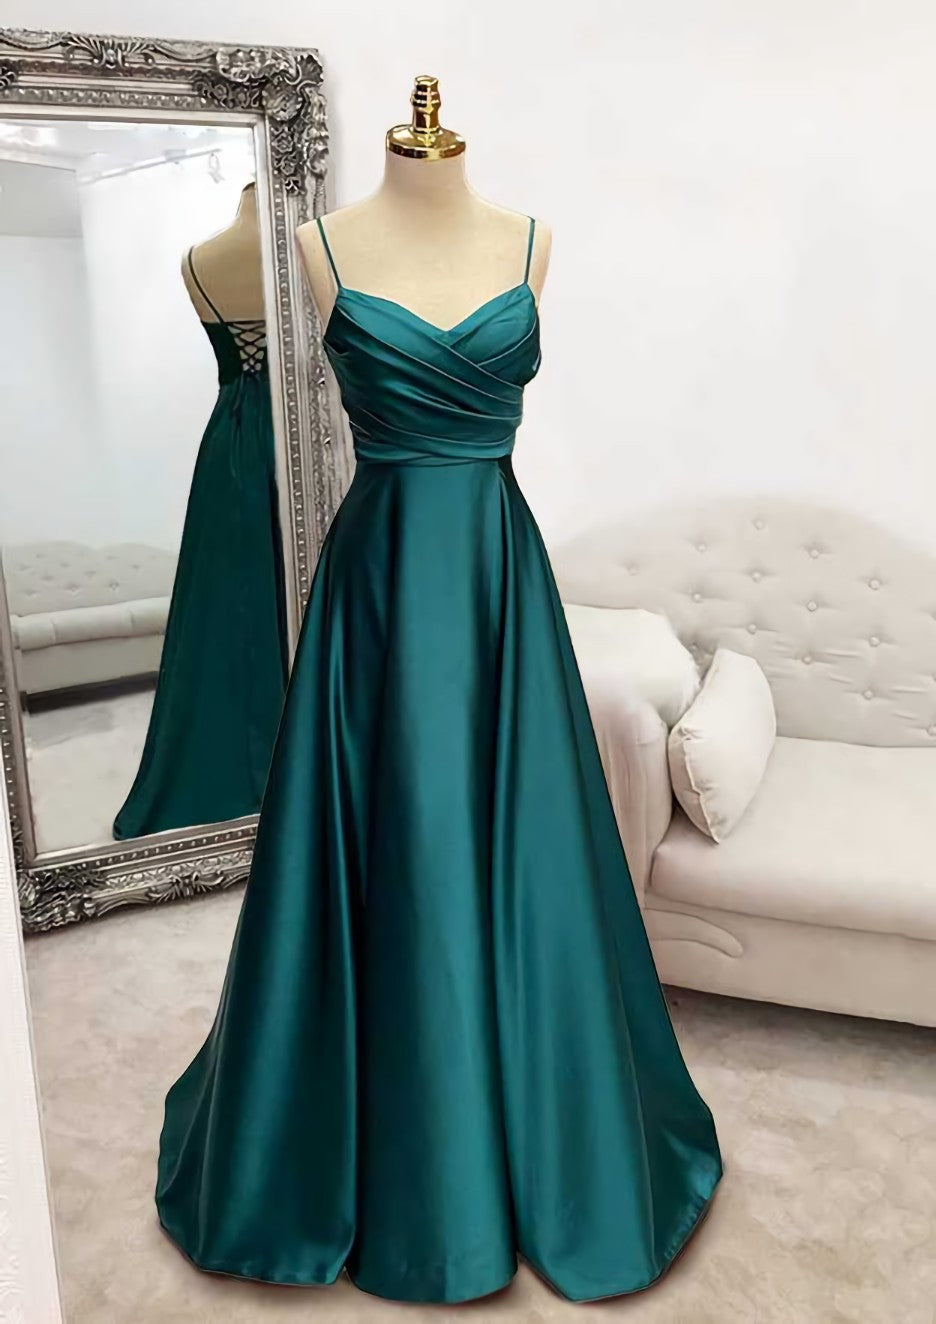 Dress Casual, A-line V Neck Spaghetti Straps Long/Floor-Length Satin Prom Dress With Pleated